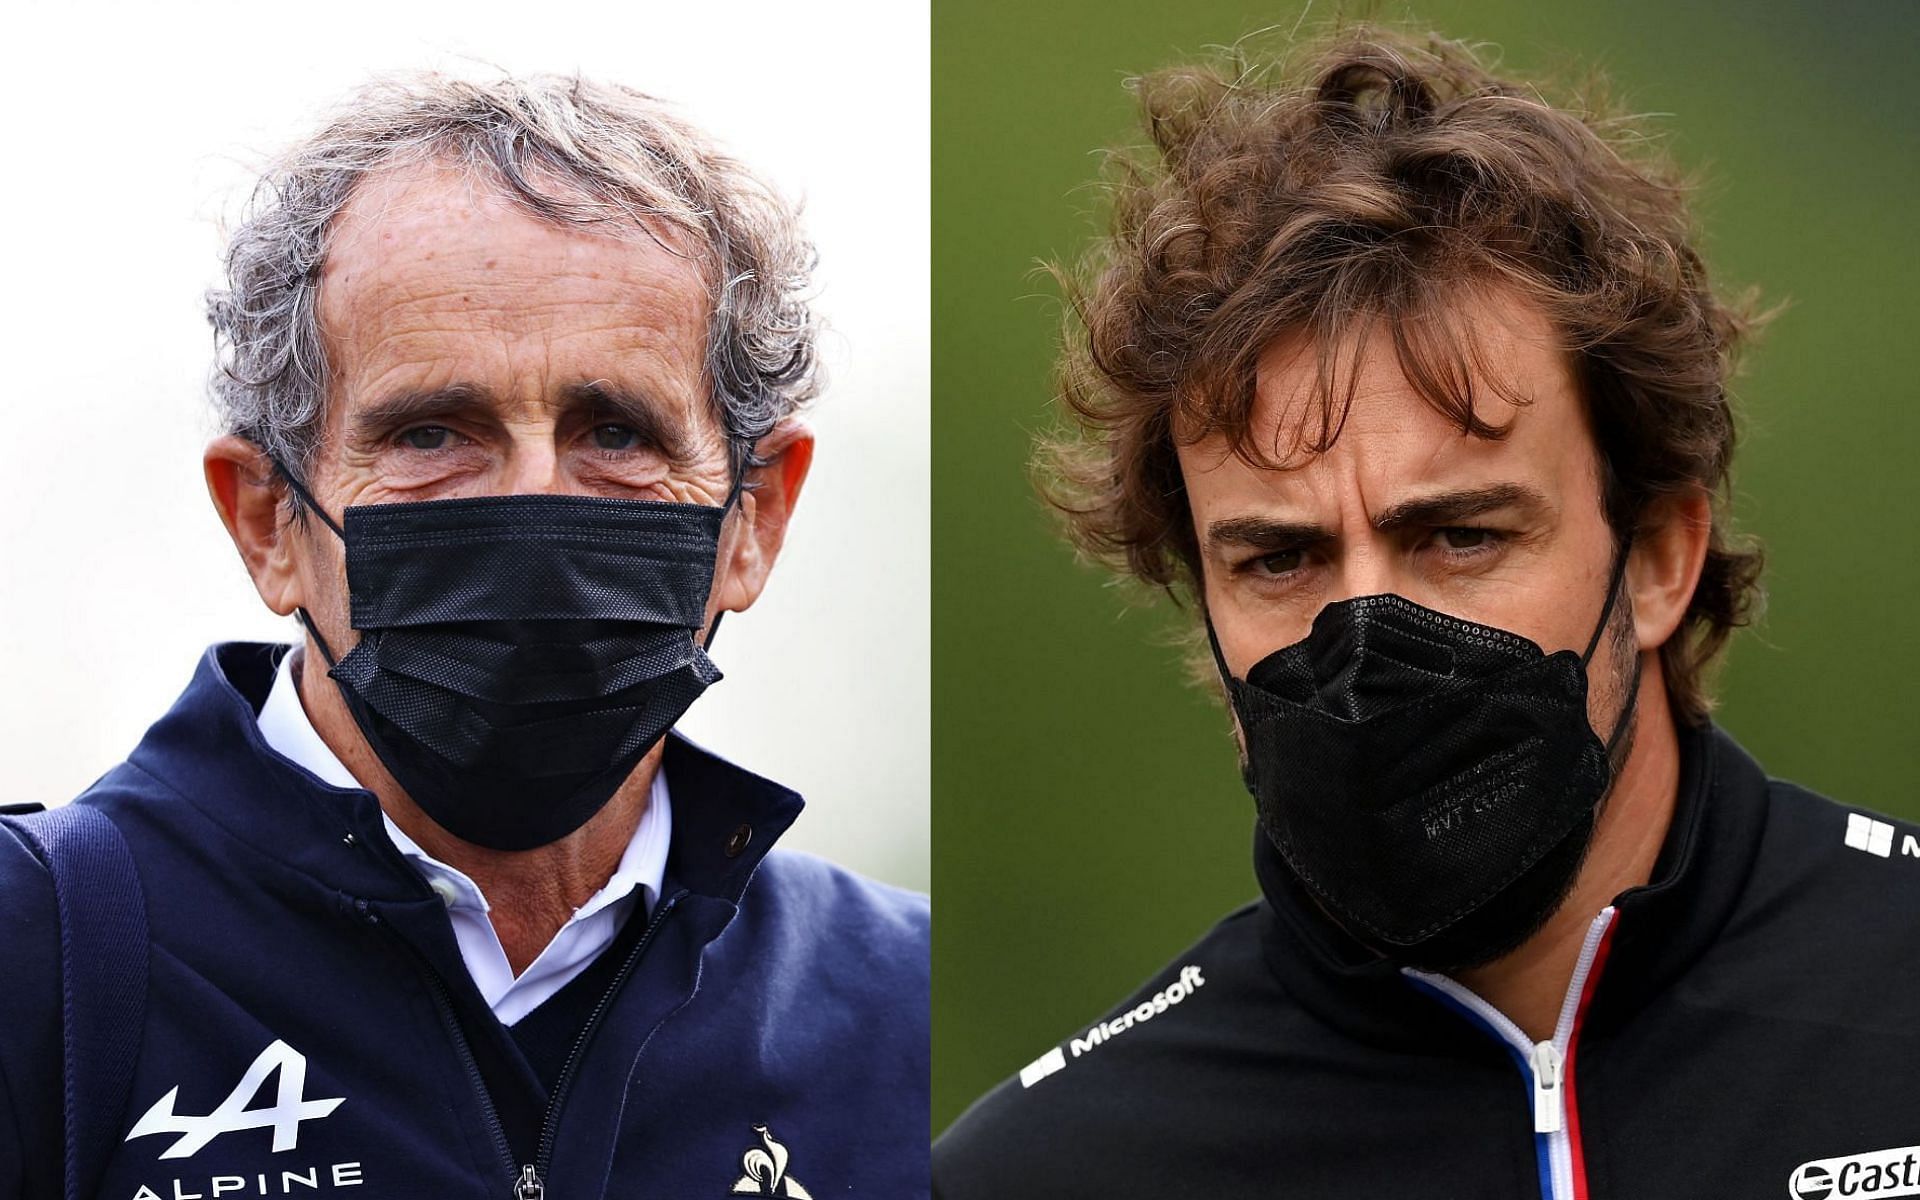 Alain Prost (left) believes Fernando Alonso (right) is the best driver on the current F1 grid